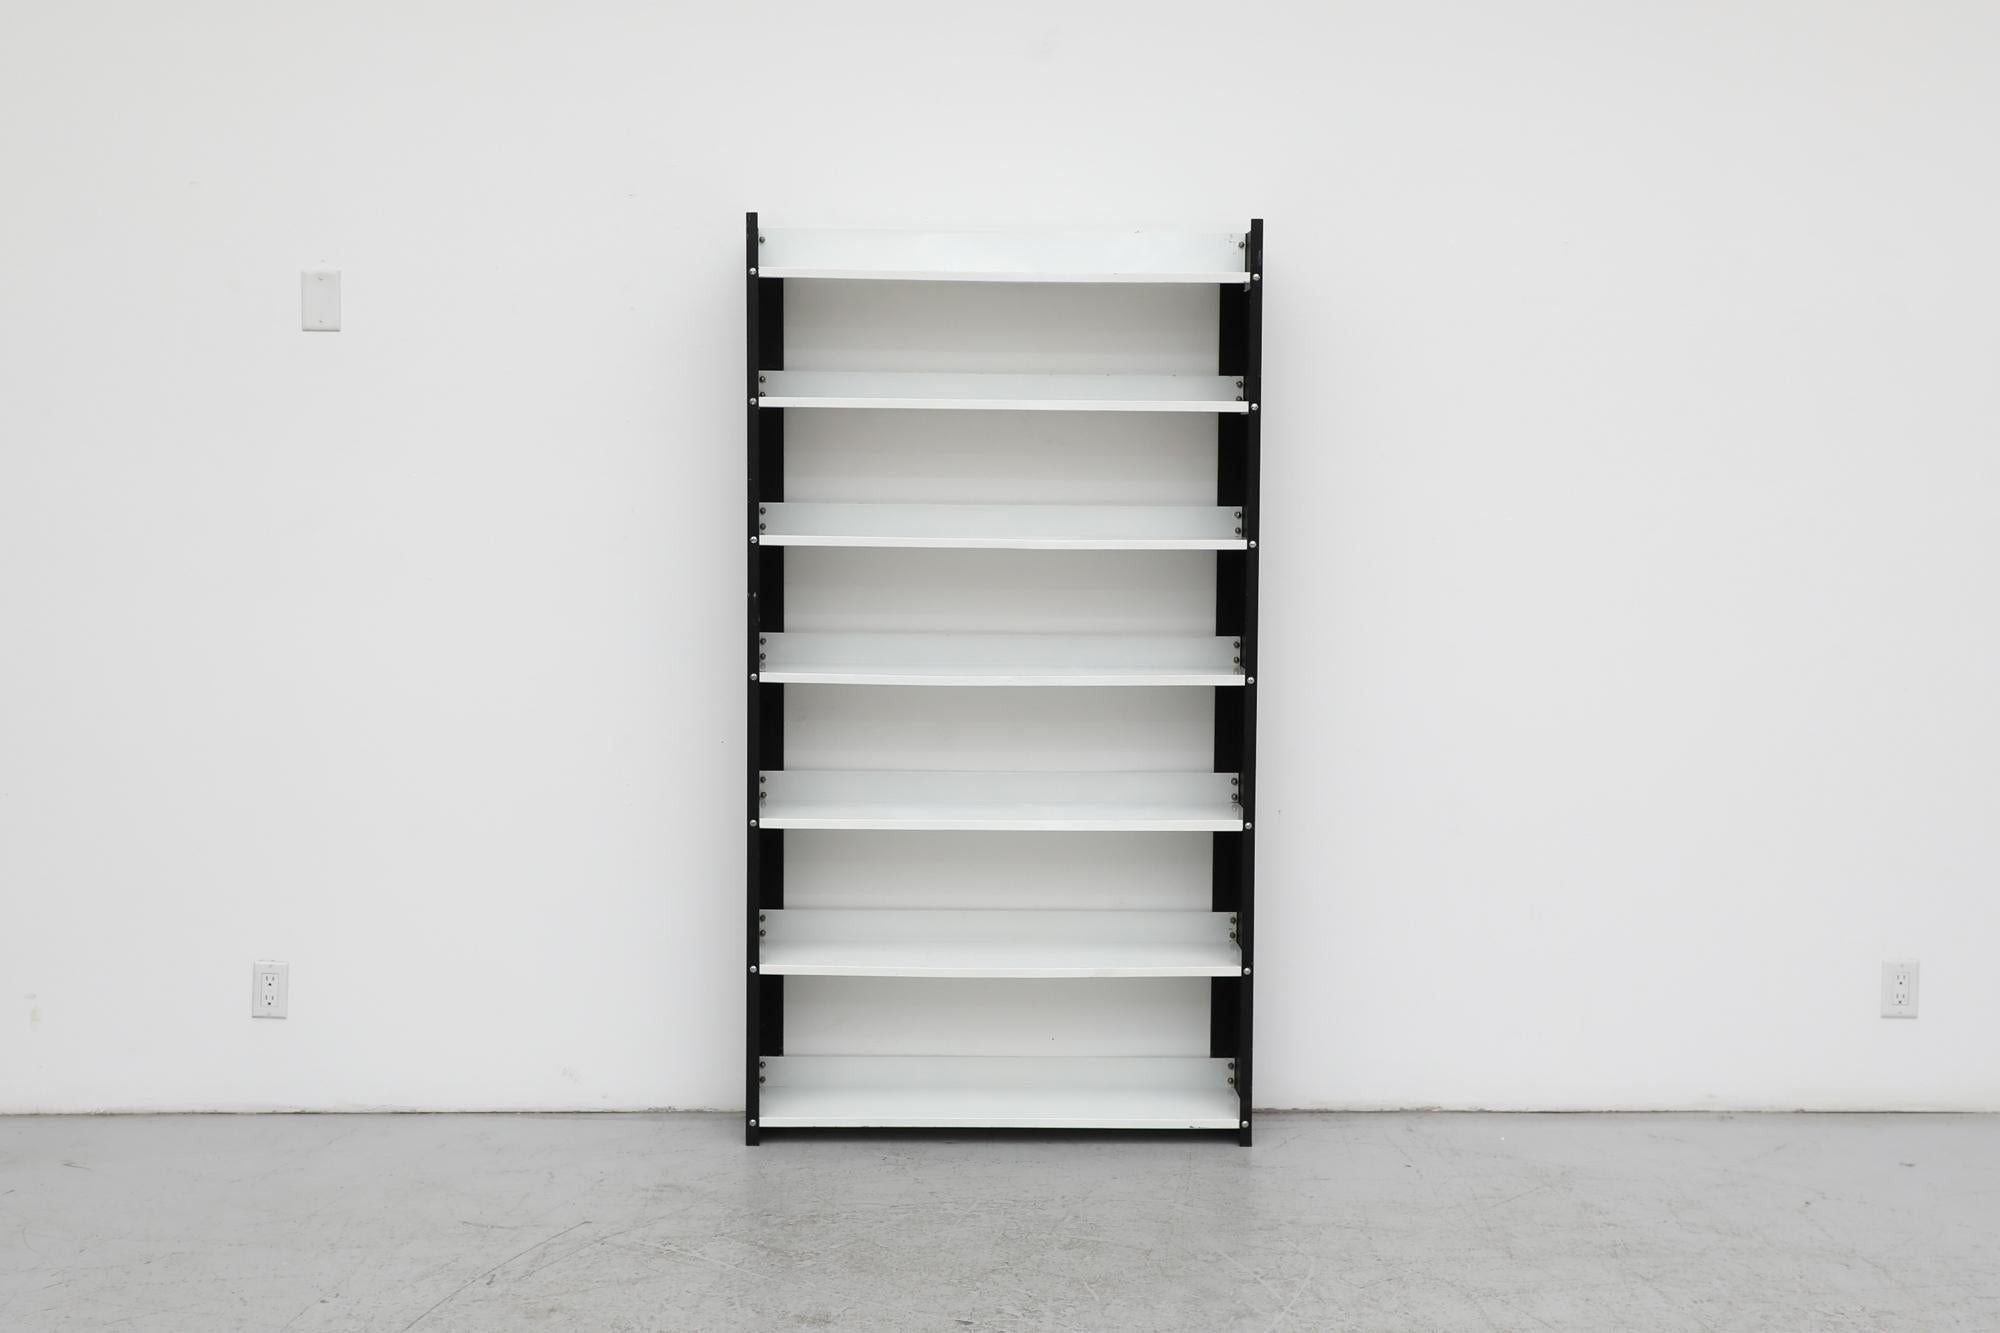 Mid-Century, black and white enameled metal industrial bookshelf by Jan van der Togt for Tomado. Lightweight versatile shelving unit perfect for displaying your favorite books and accessories. In original condition with some visible wear and